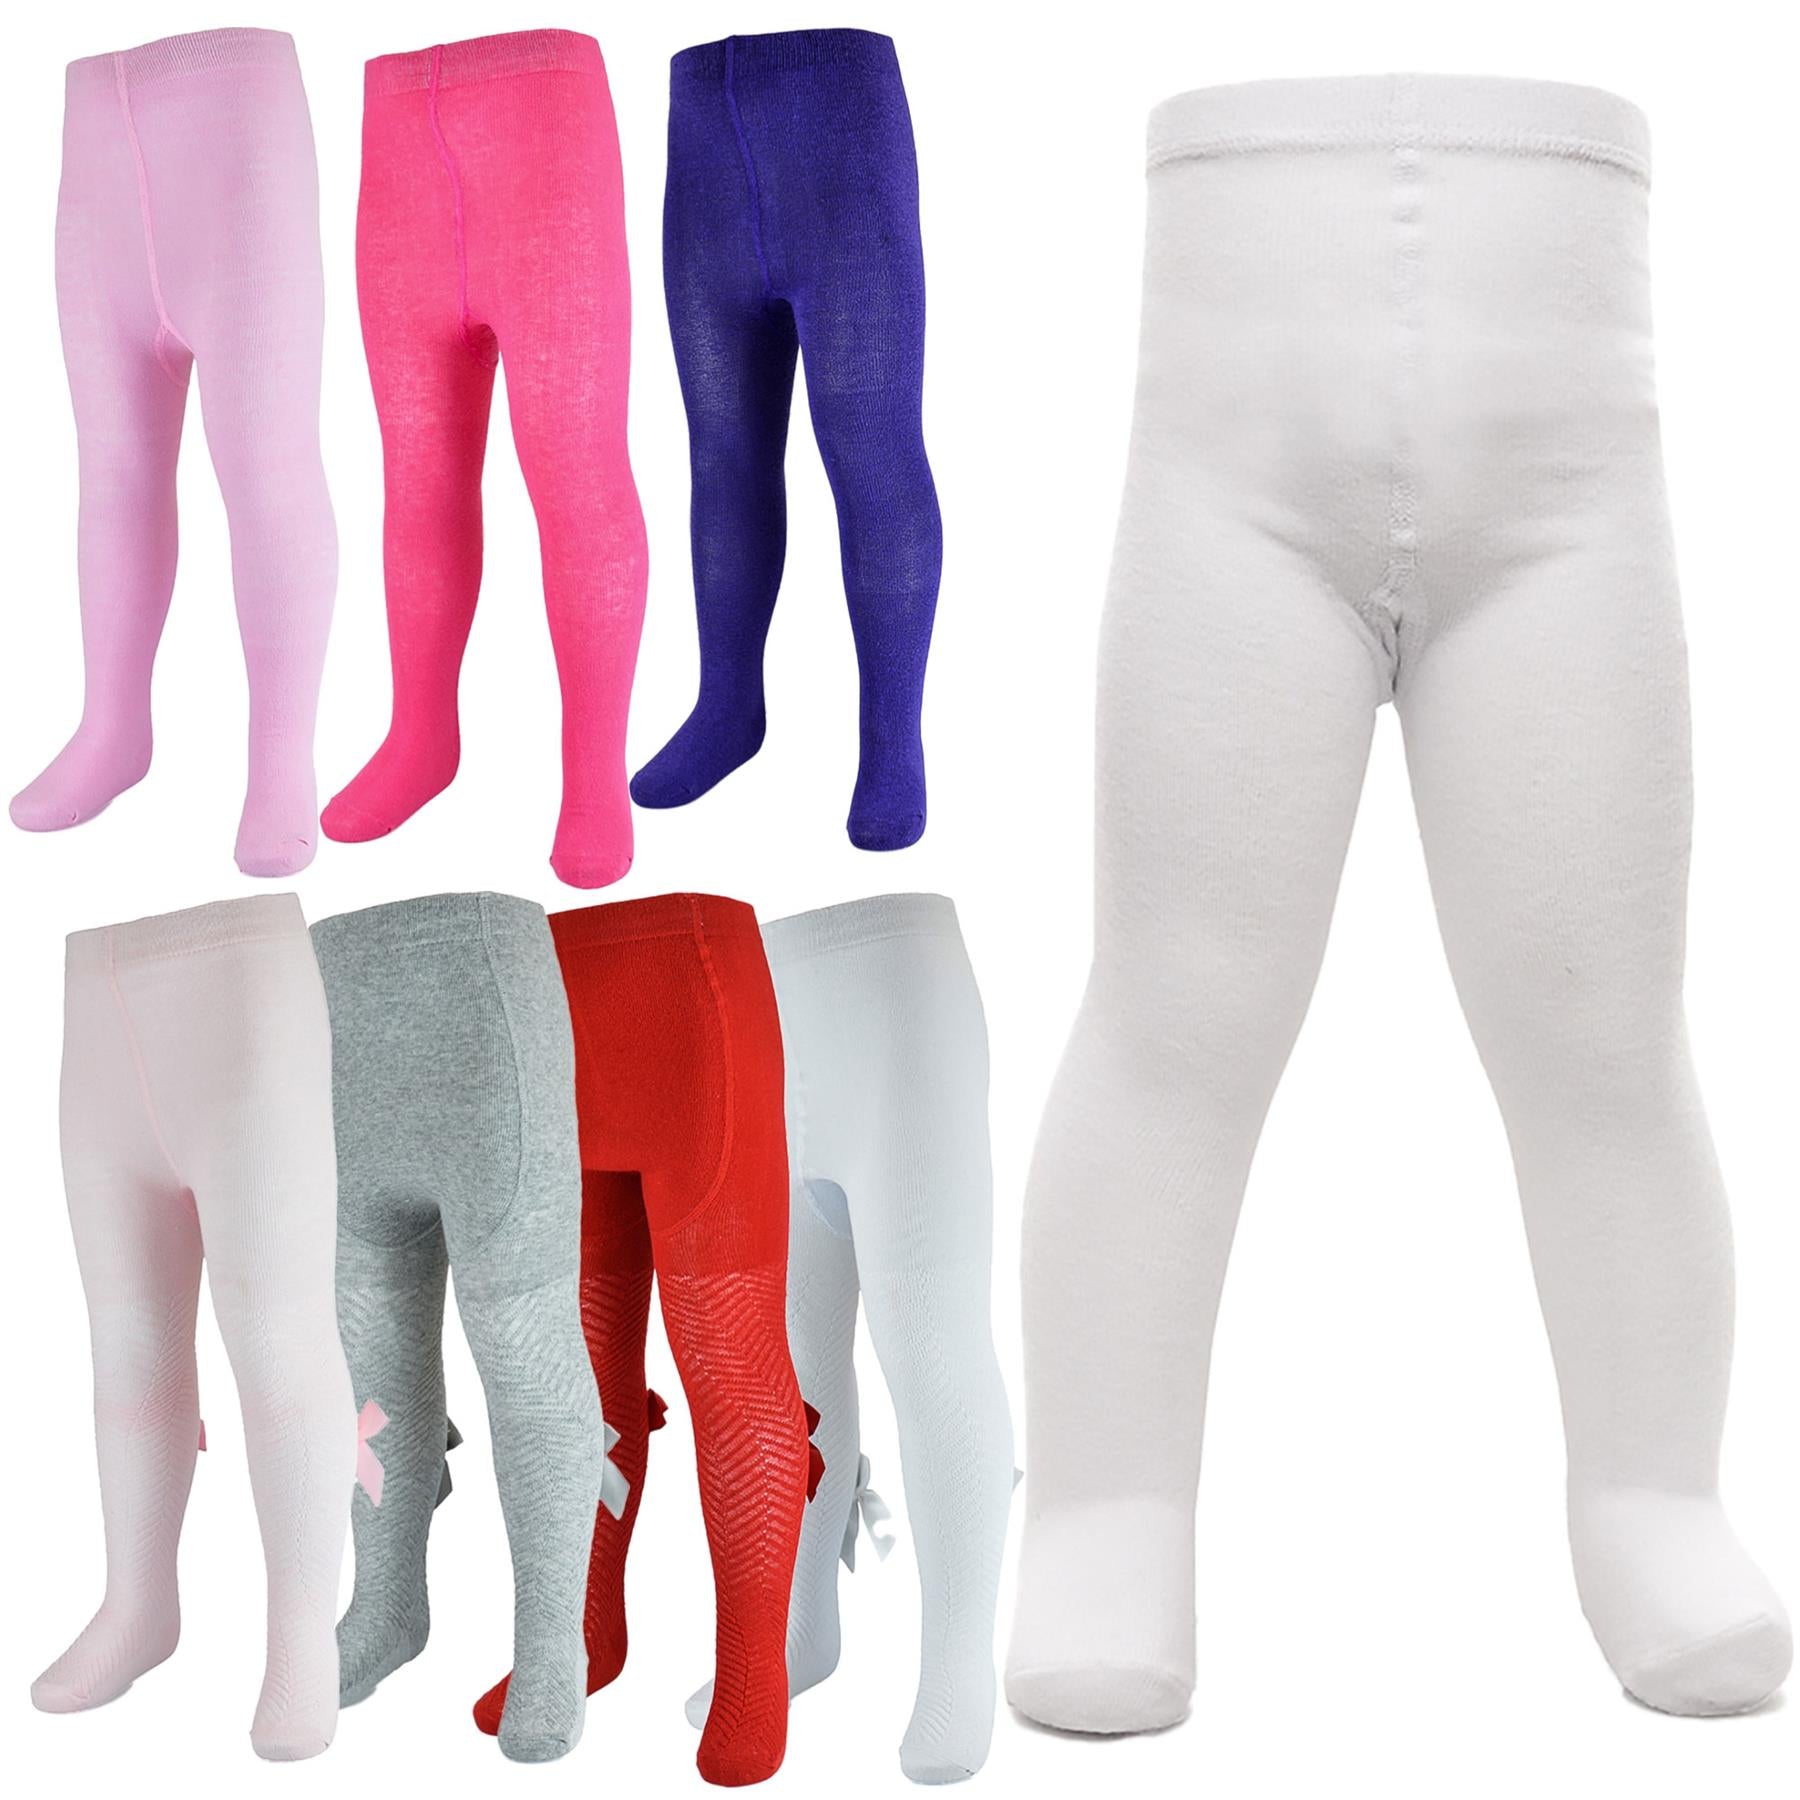 Infant Toddler Baby Girls Tights Cotton Rich Stretchy Soft Newborn Leggings